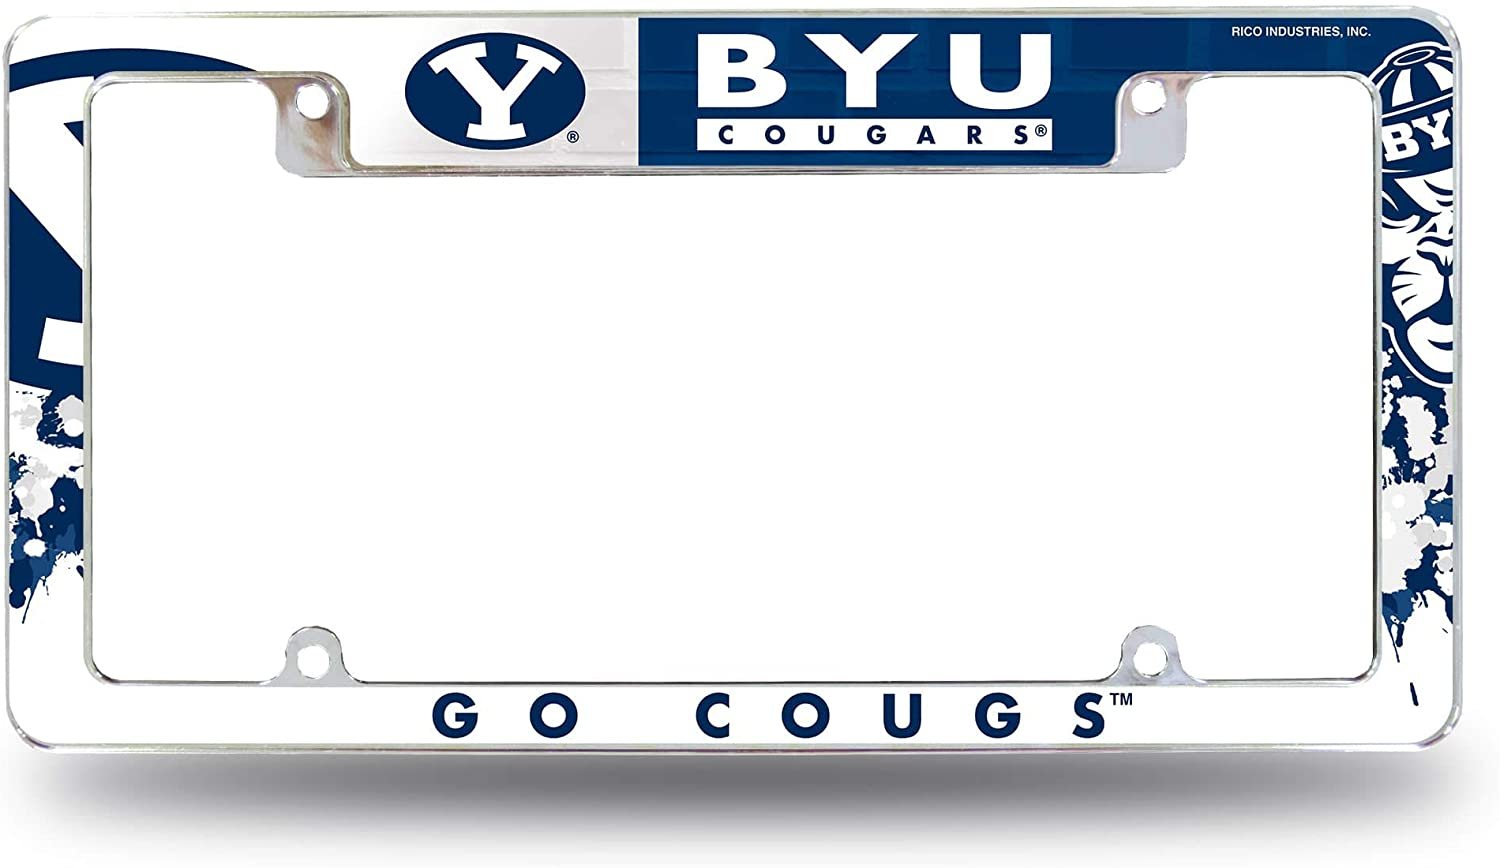 Brigham Young University Cougars BYU Metal License License Plate Frame Tag Cover, All Over Design, 12x6 Inch